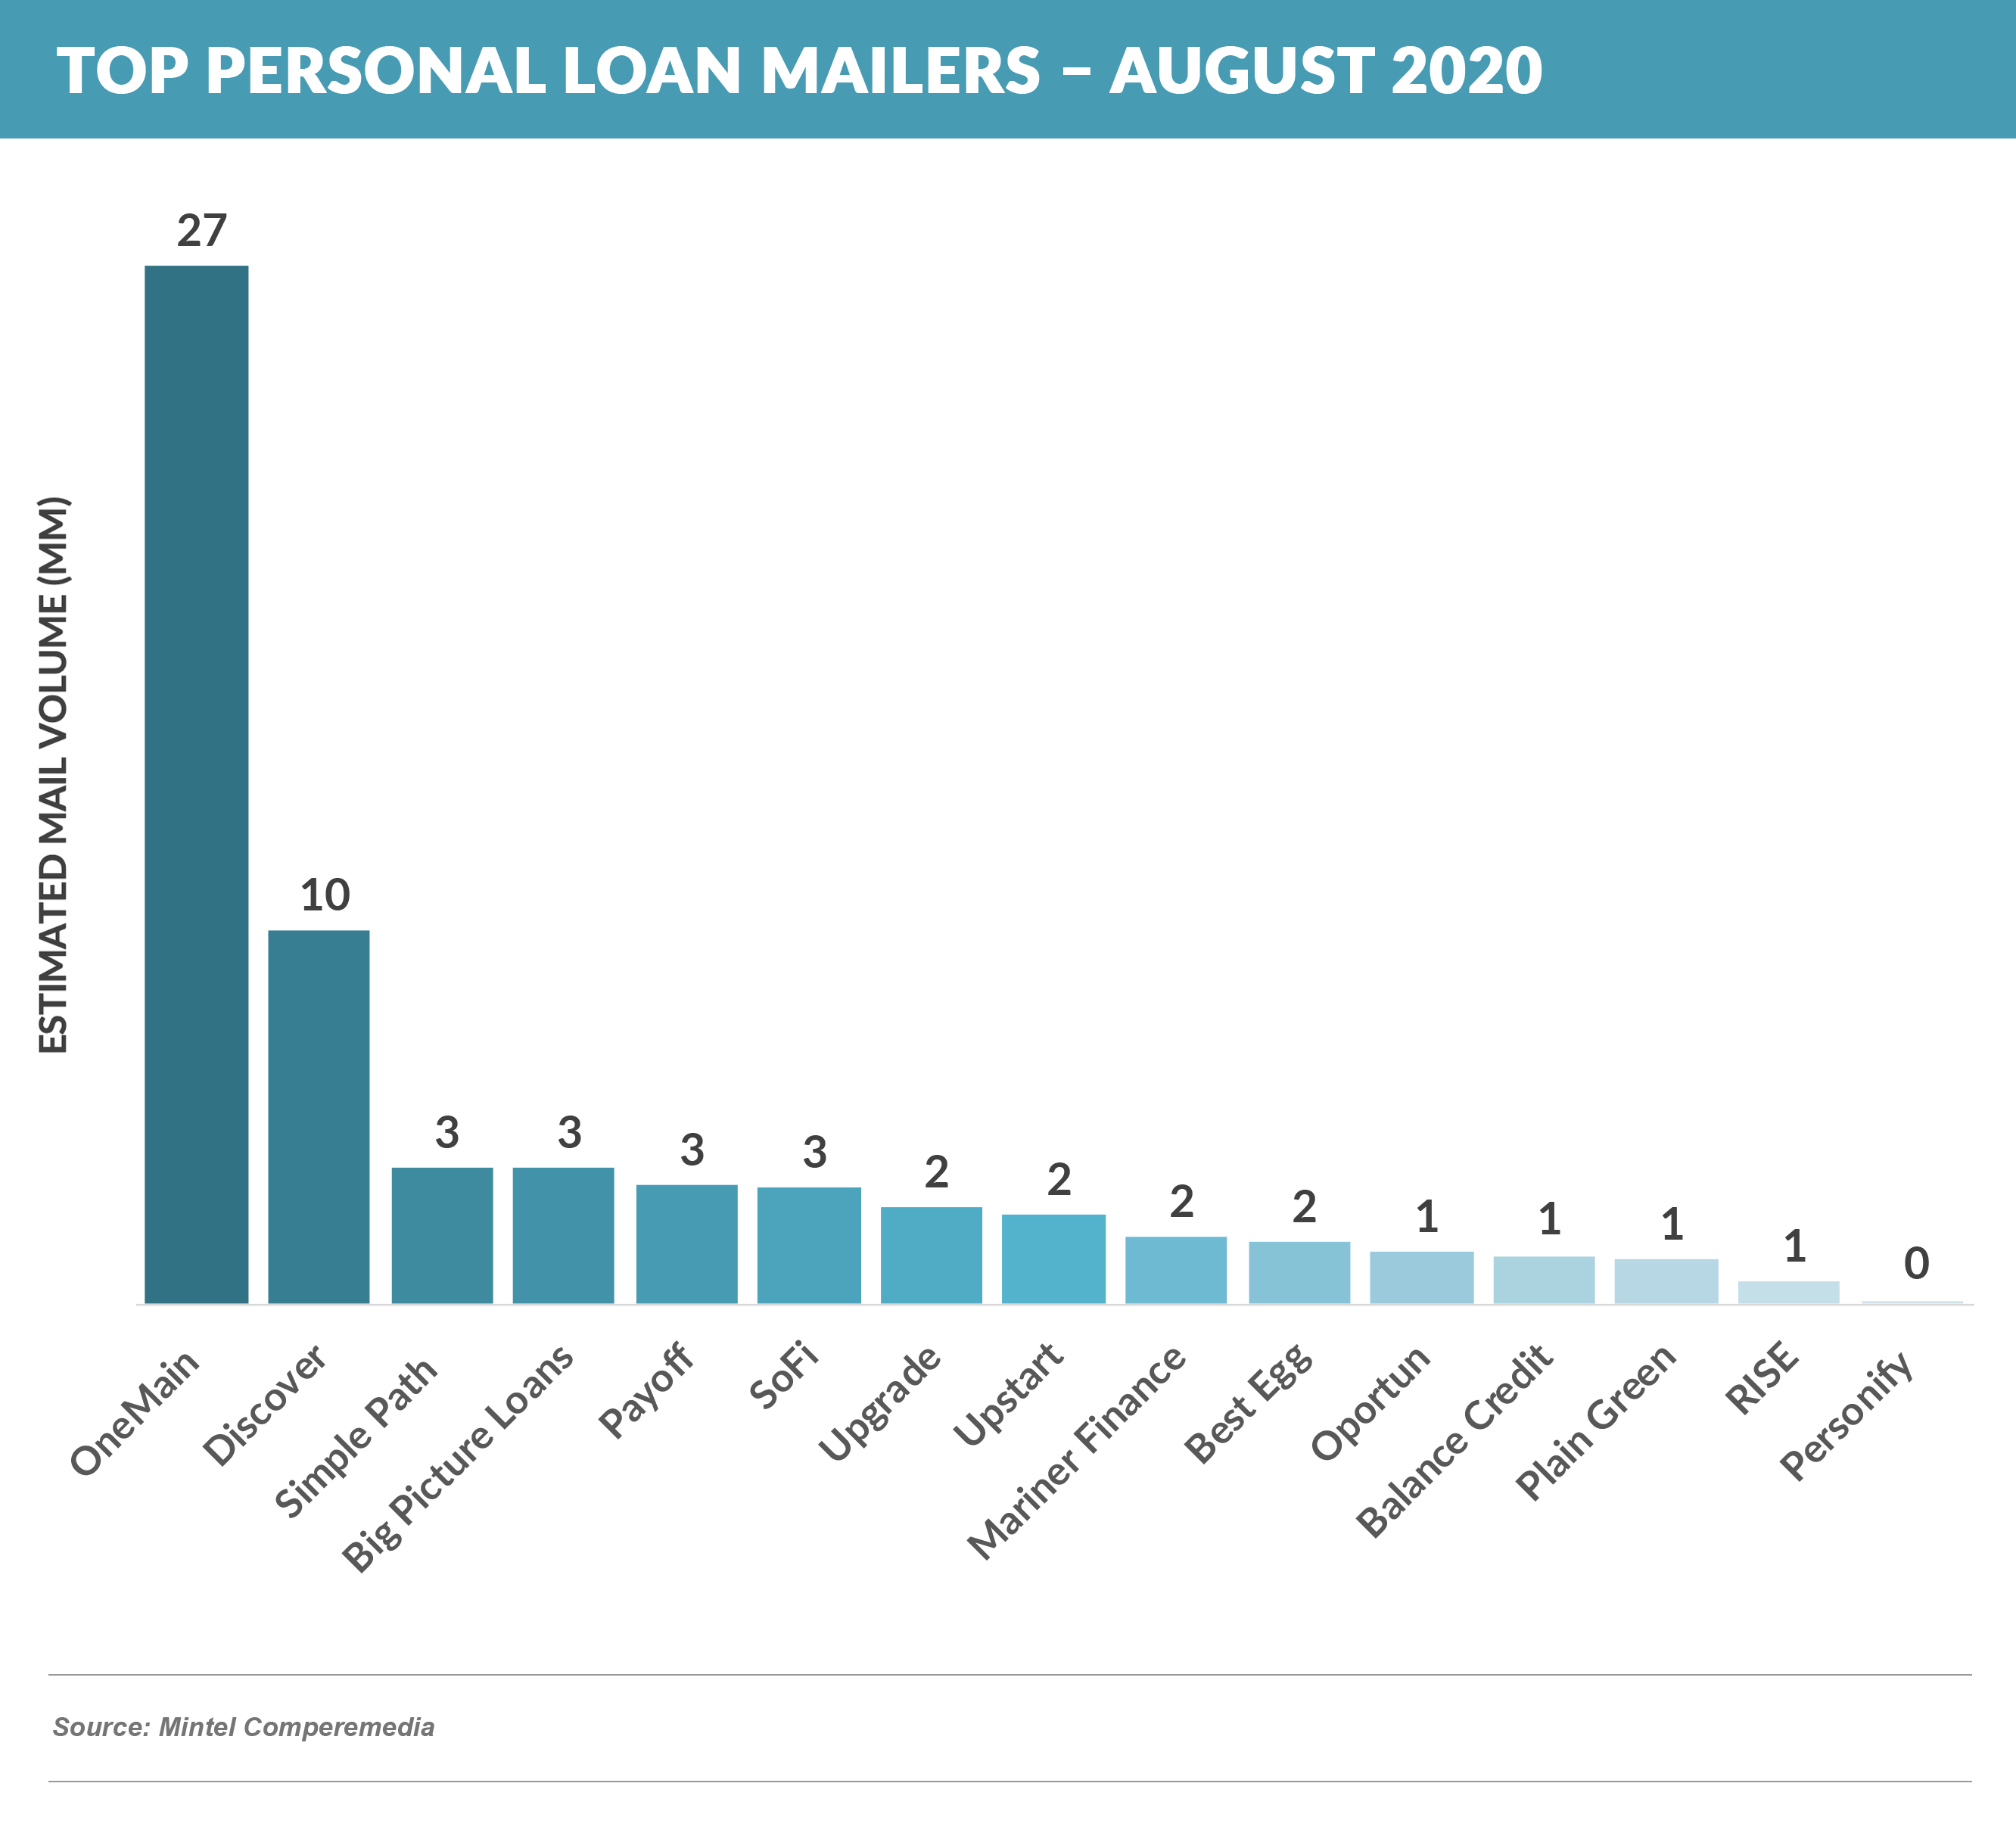 Top Personal Loan Mailers – AUGUST 2020 20200926